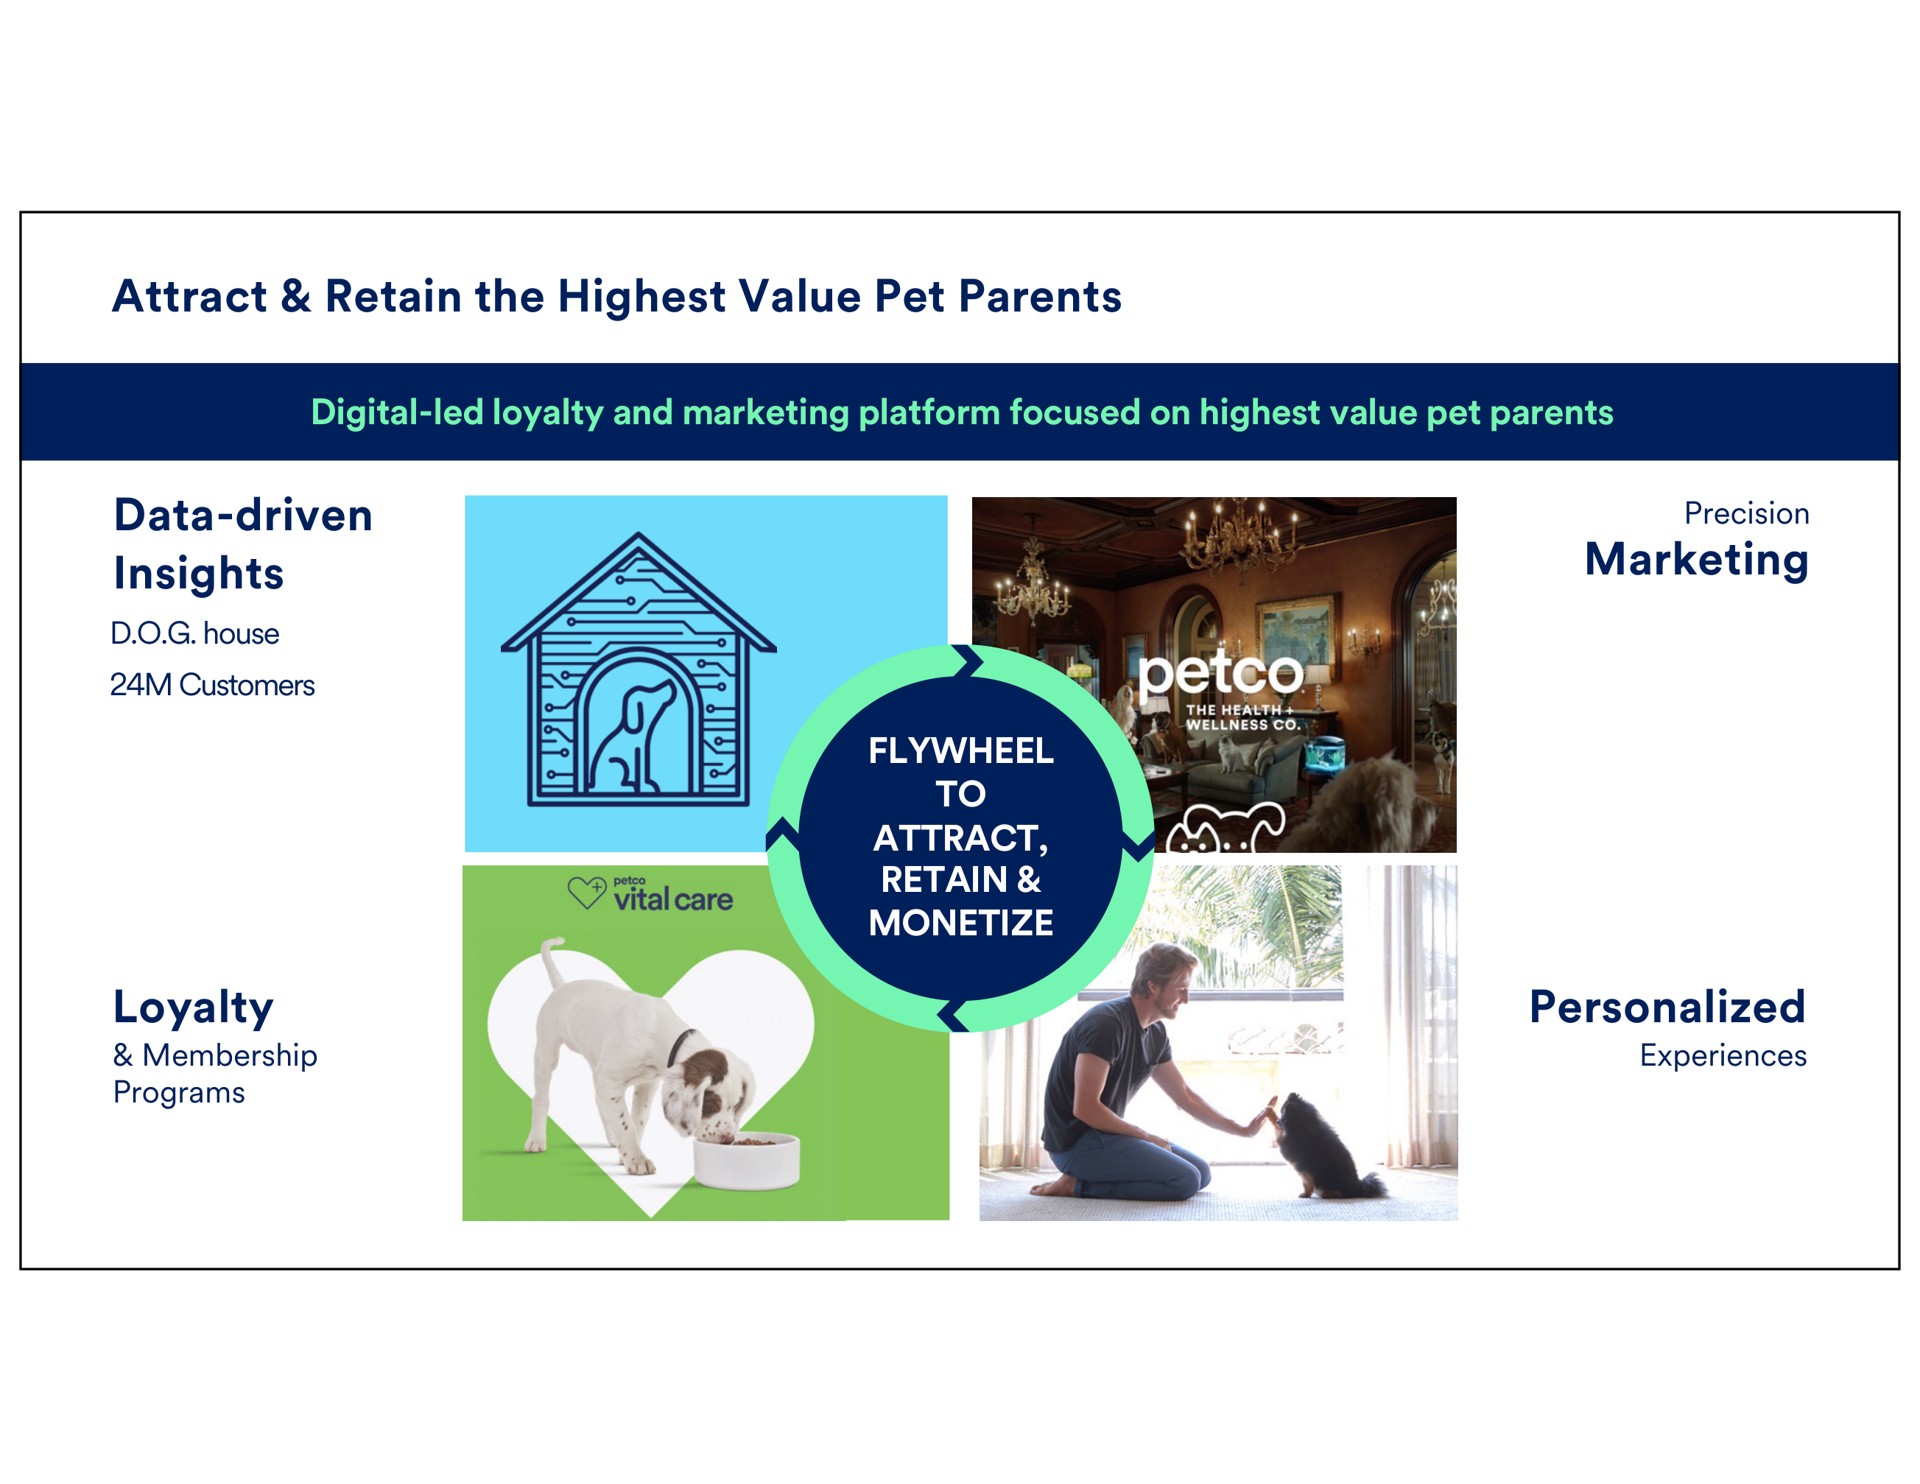 attract retain the highest value pet parents data driven insights loyalty marketing personalized digital led and platform focused on house customers precision sas wellness vital care to monetize experiences membership programs | Petco